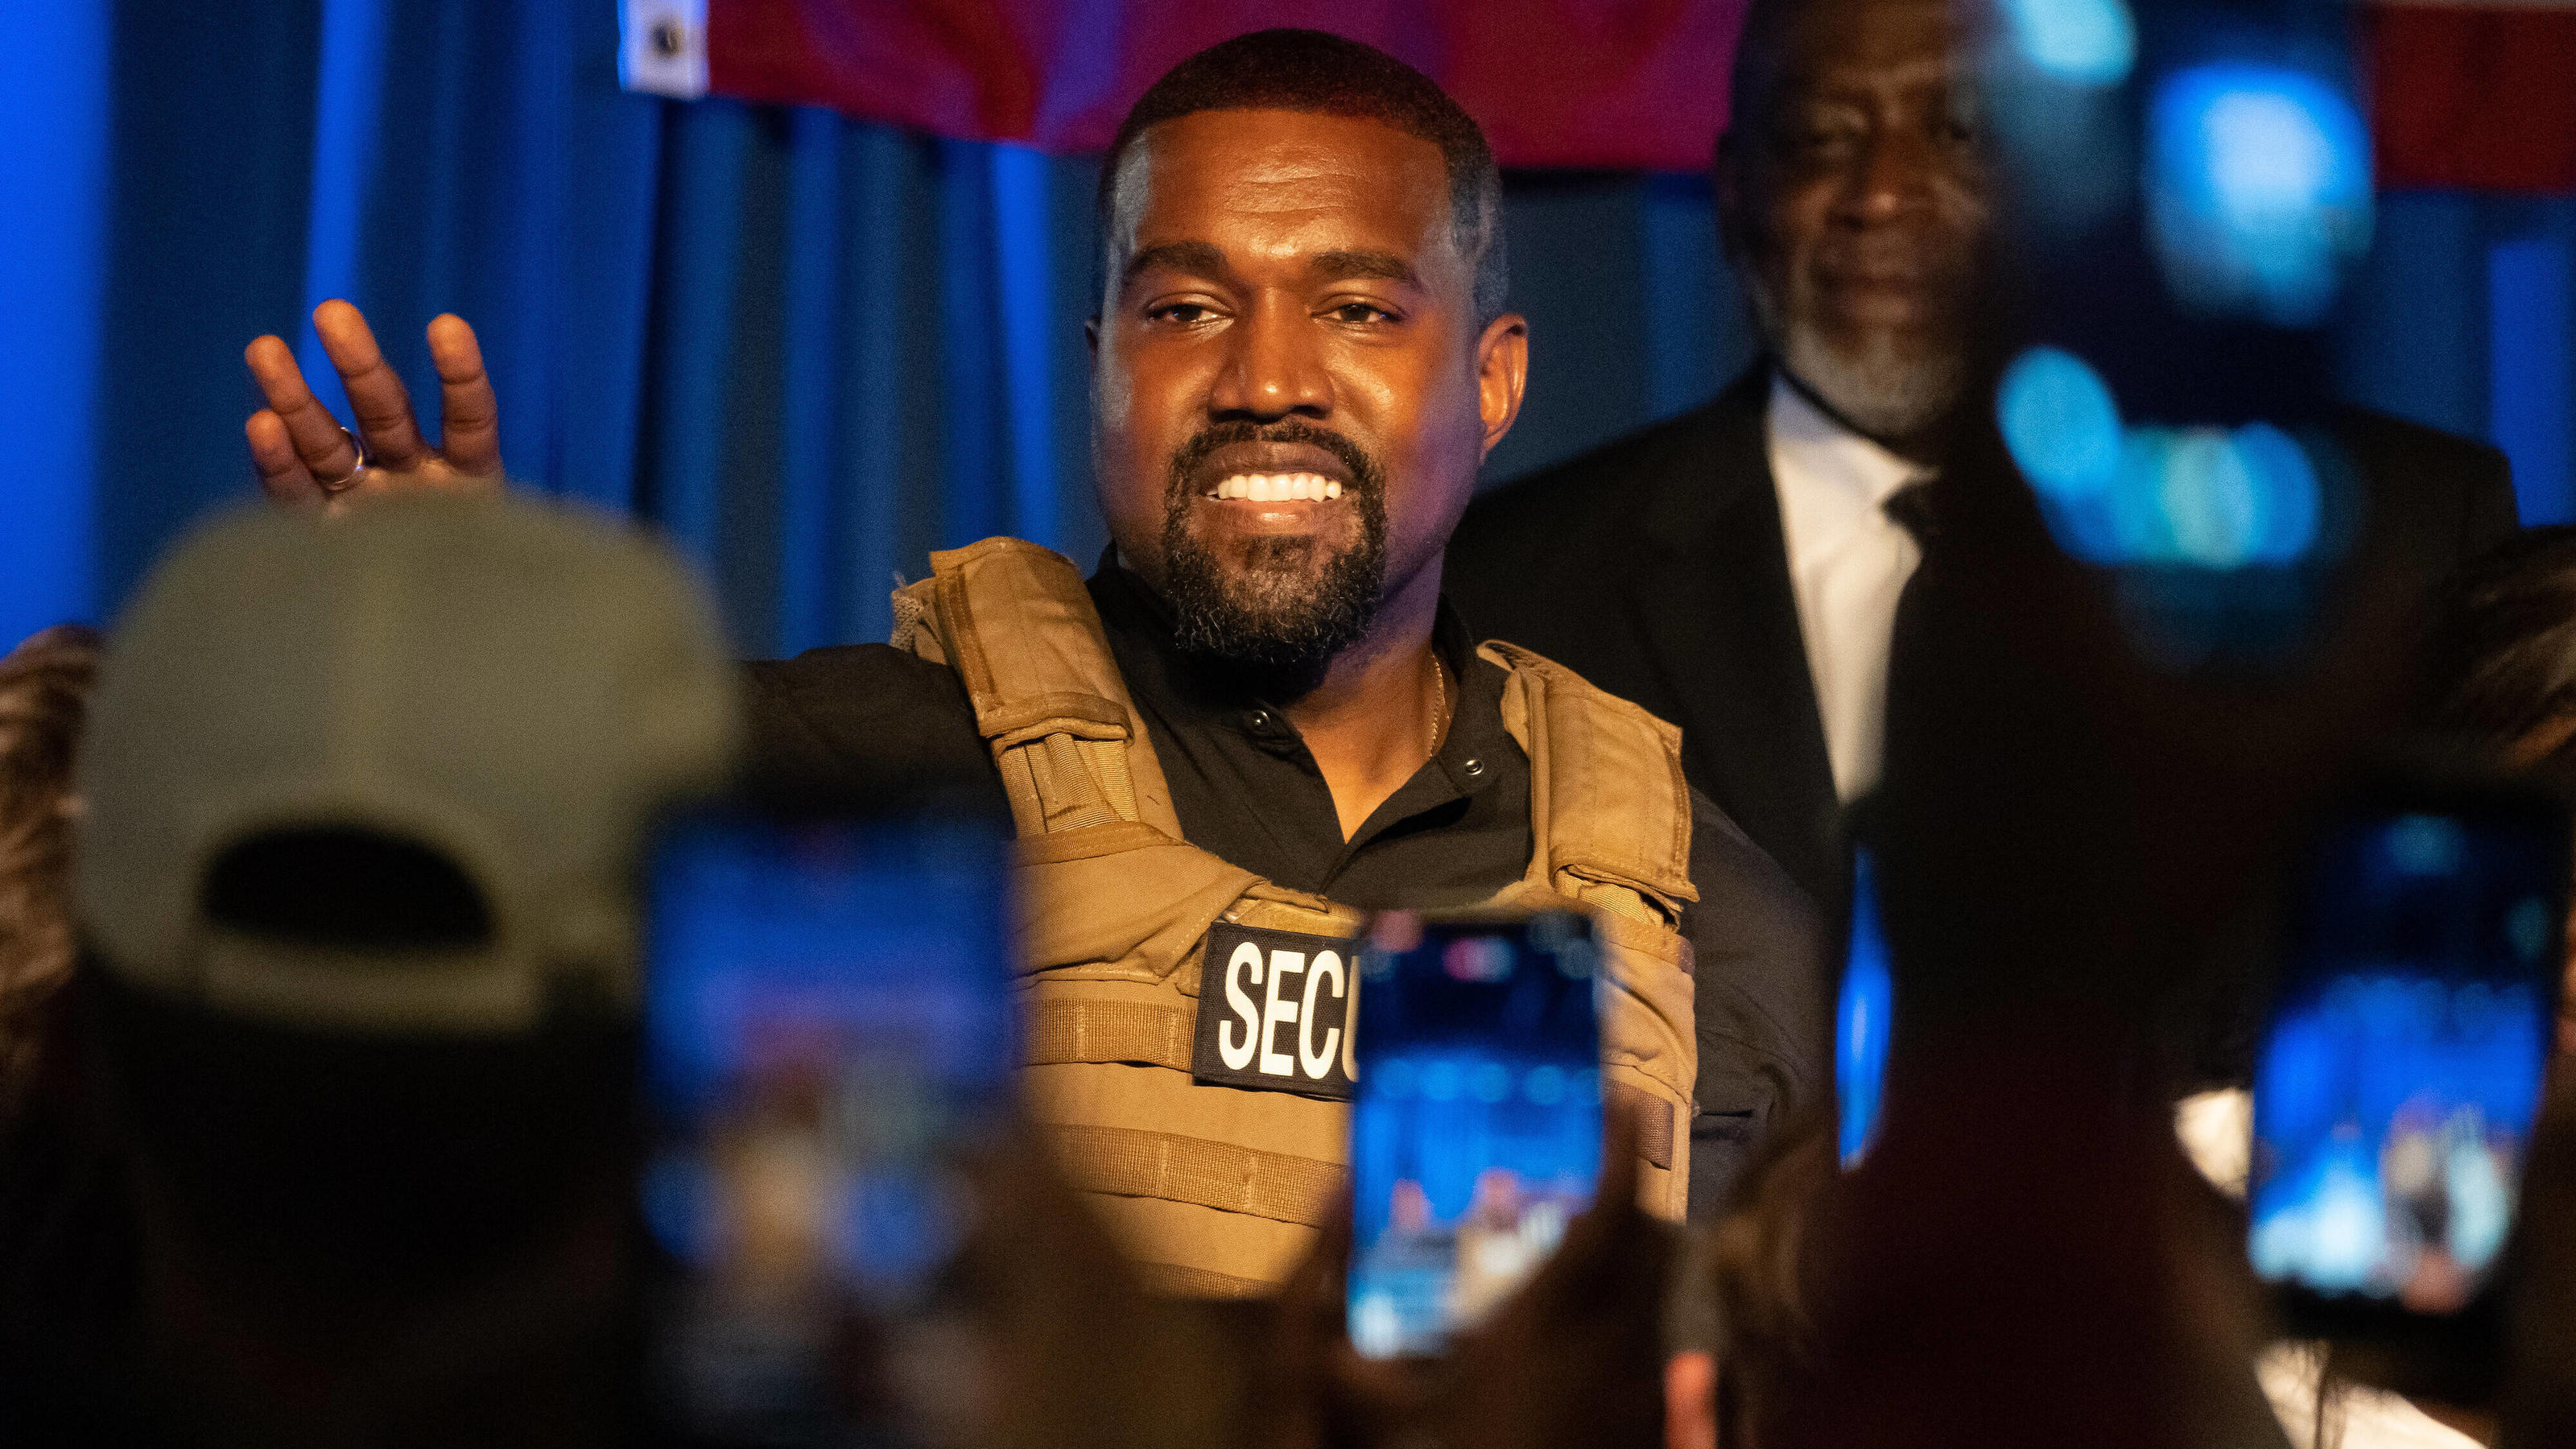  American rapper and entrepreneur Kanye West, wearing a bulletproof vest, addresses supporters during his first campaign event in the upcoming presidential election, Sunday, July 19 2020, in North Charleston, South Carolina. Kanye told the crowd that